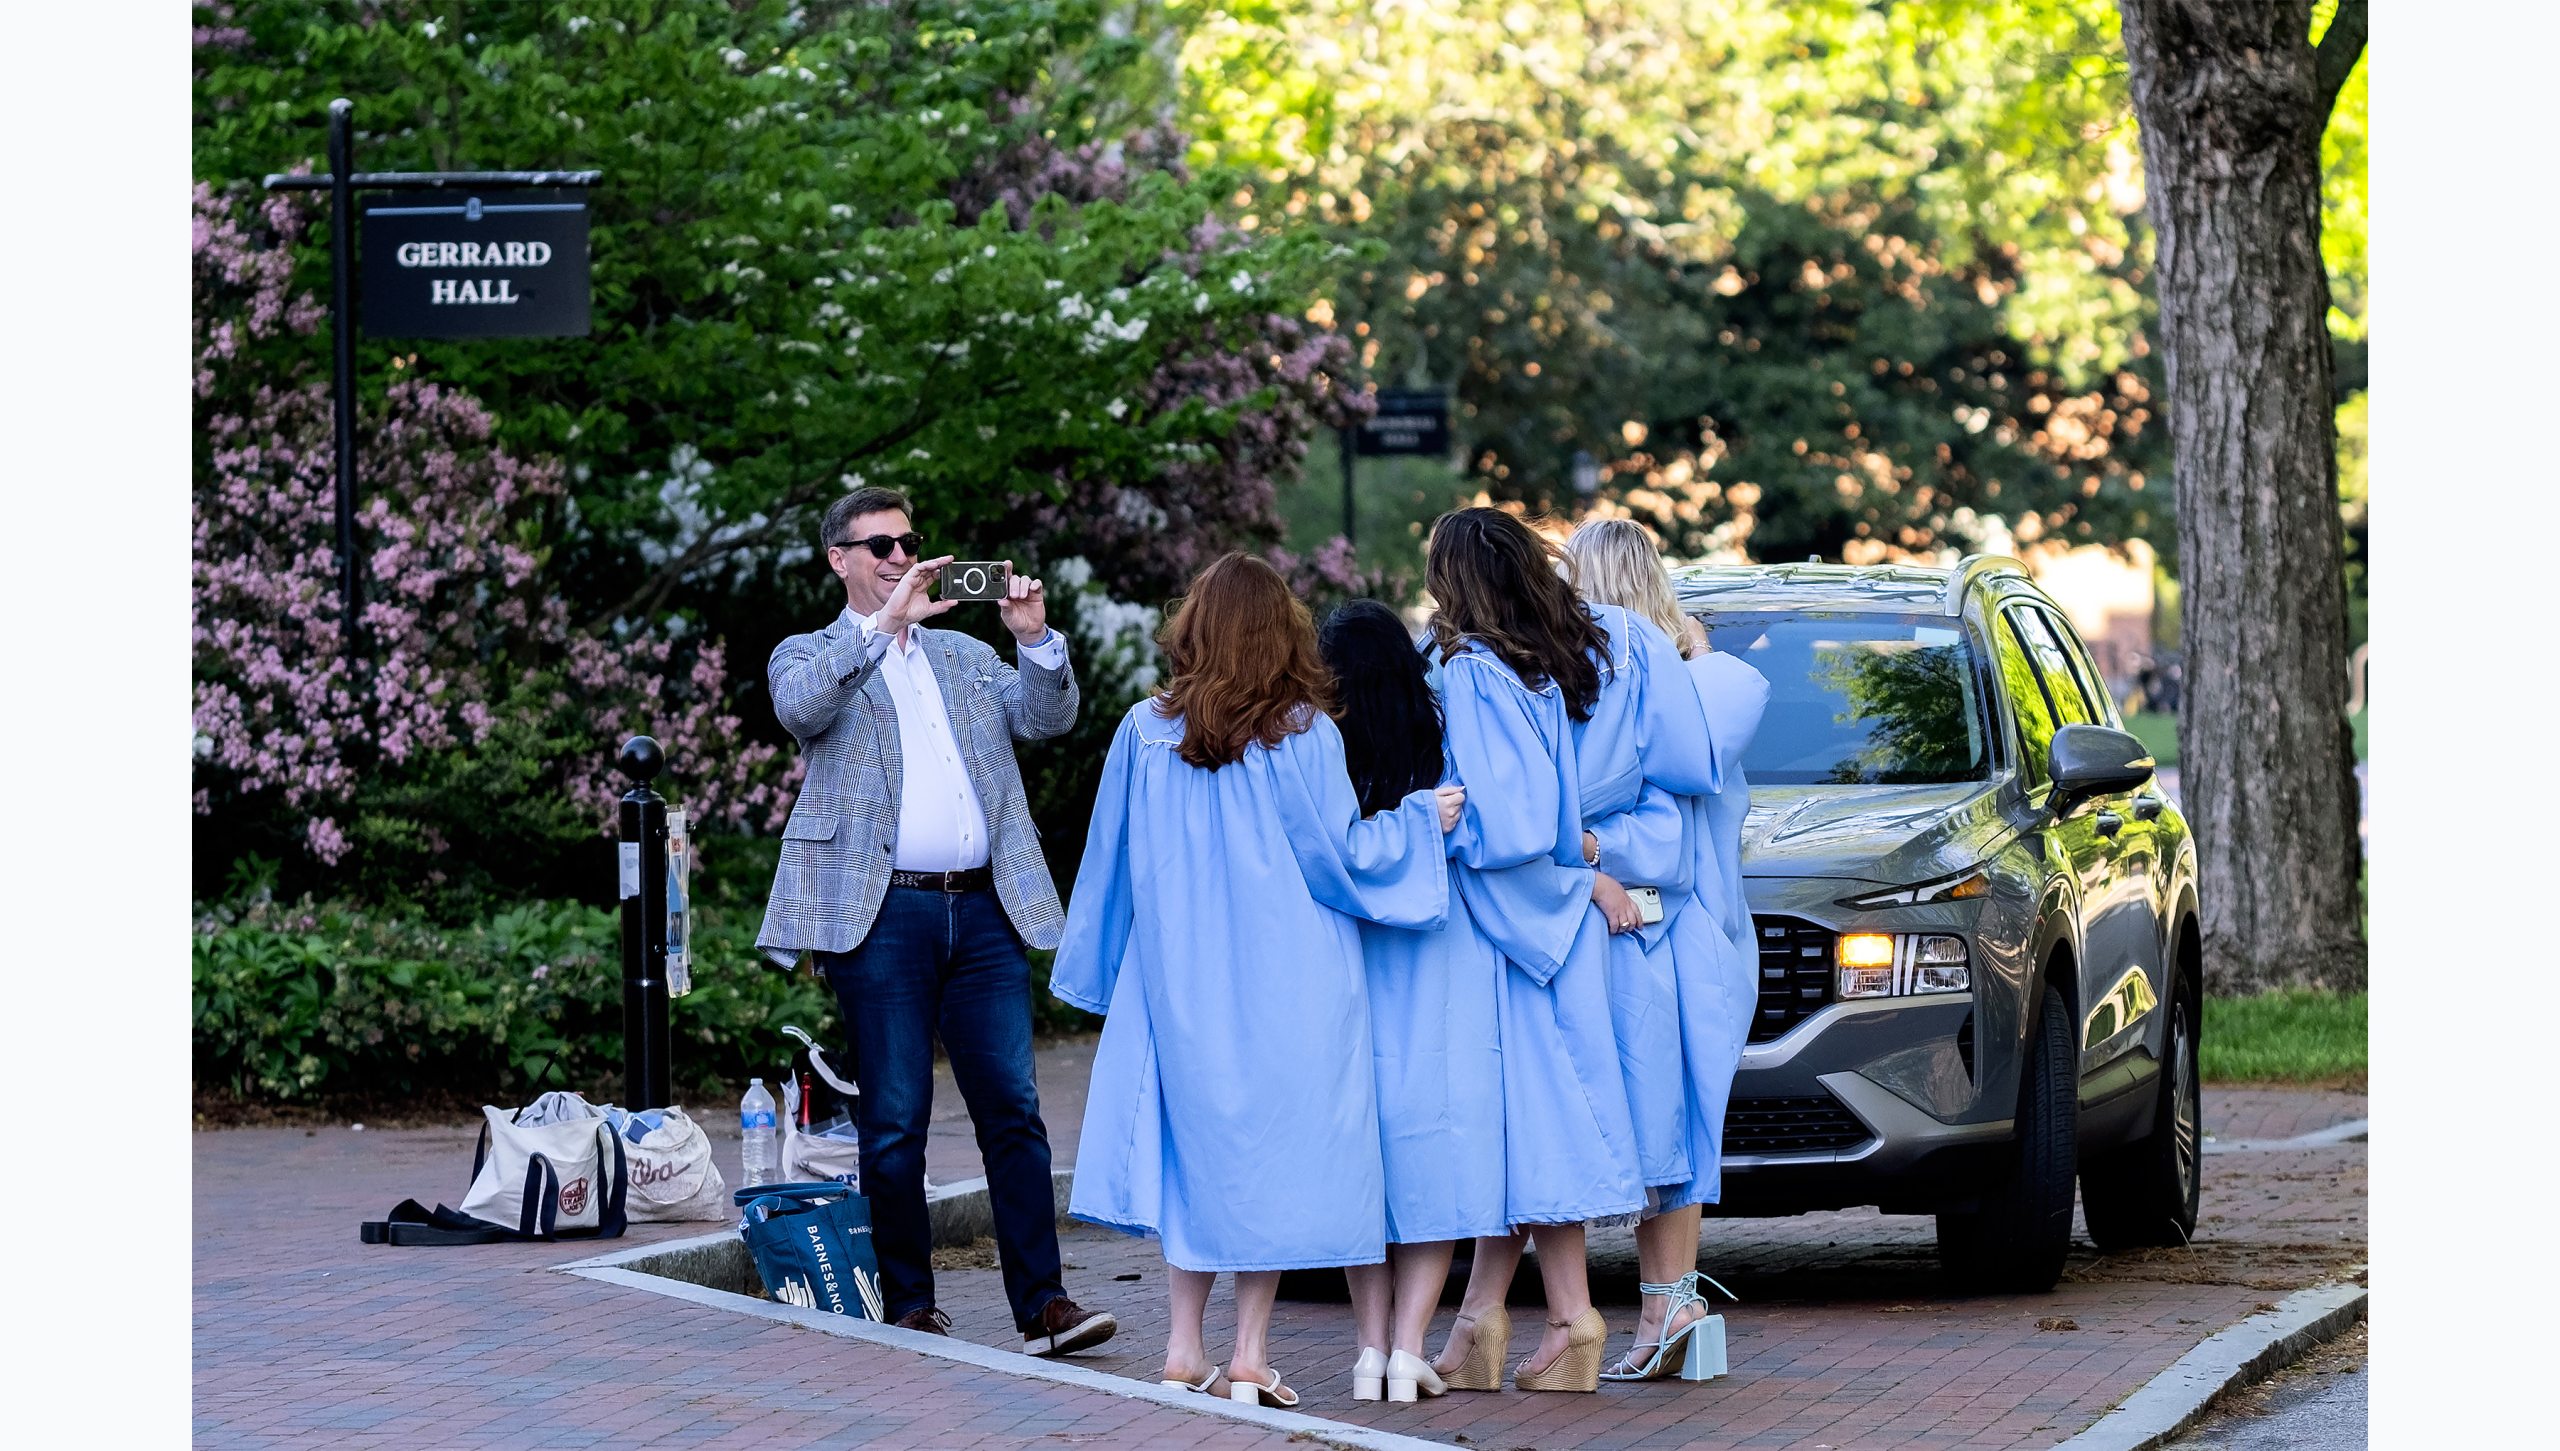 A man taking a picture with a phone of a group of students in graduation gowns.